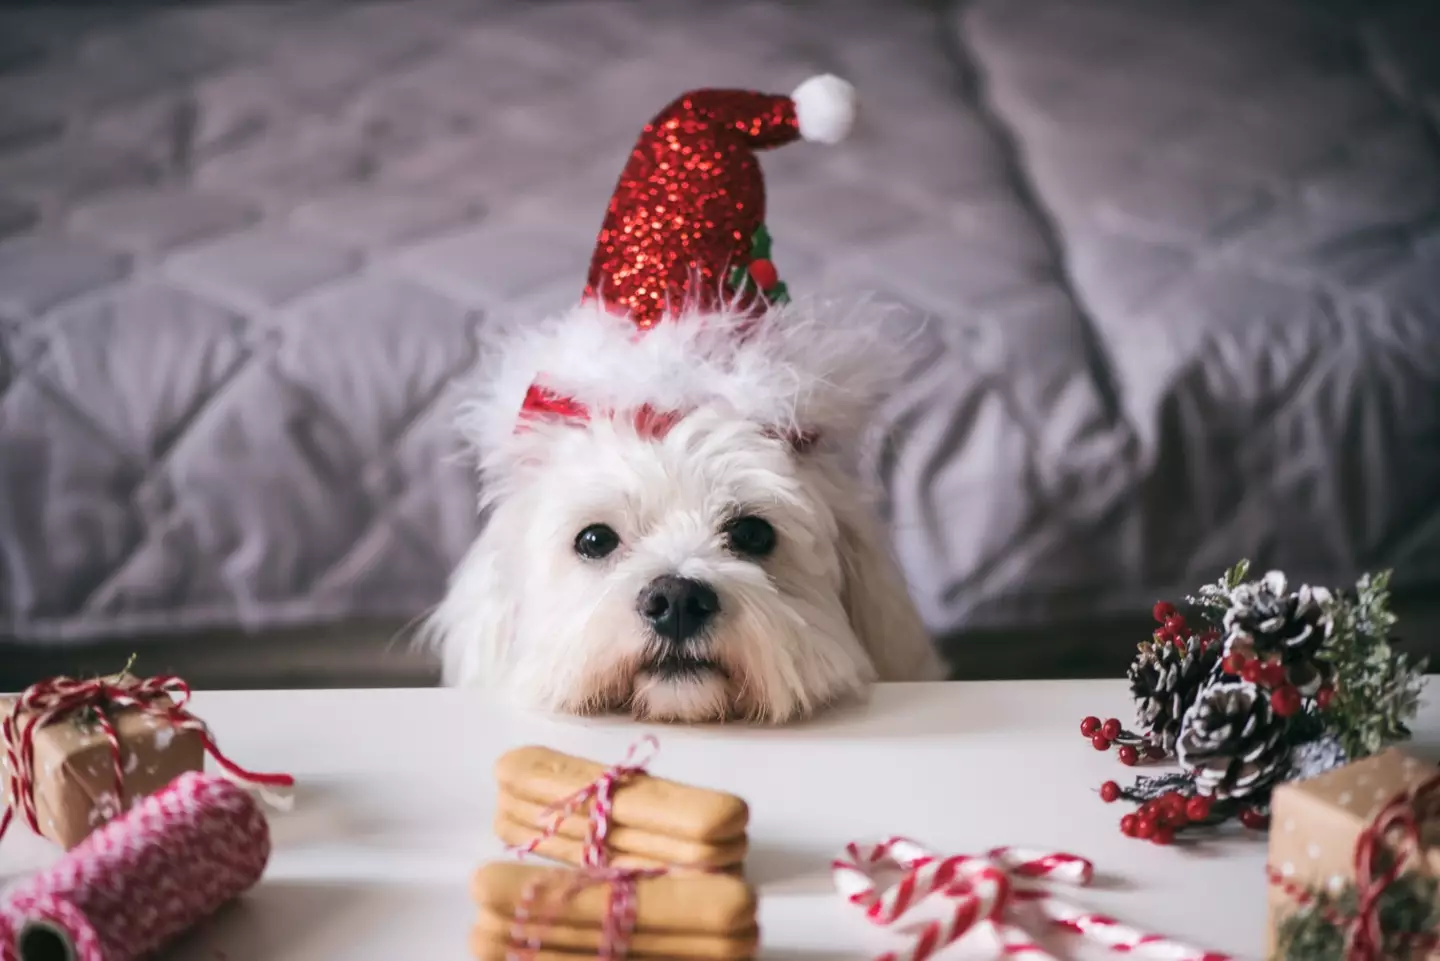 Edible decorations can be fatal to your dog.